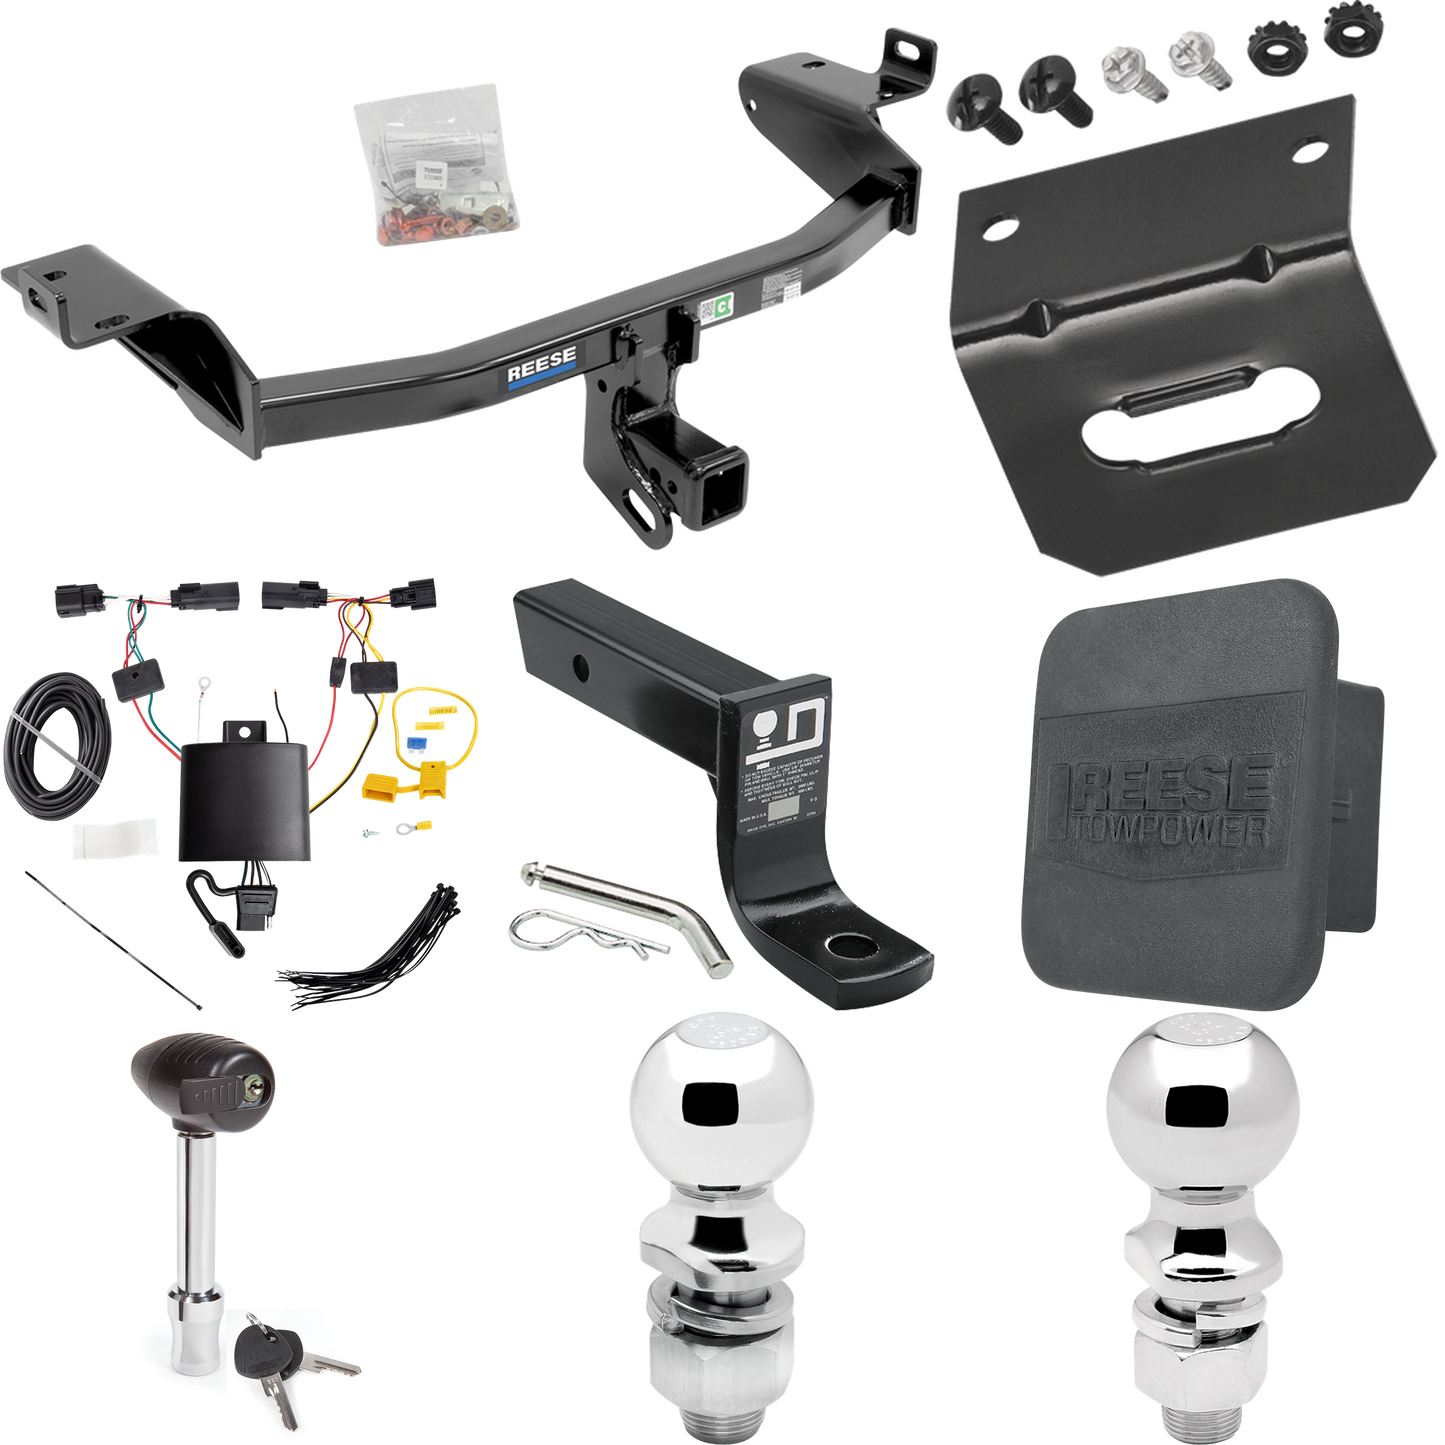 Fits 2019-2023 Jeep Cherokee Trailer Hitch Tow PKG w/ 4-Flat Wiring + Ball Mount w/ 4" Drop + 2" Ball + 2-5/16" Ball + Wiring Bracket + Hitch Lock + Hitch Cover By Reese Towpower